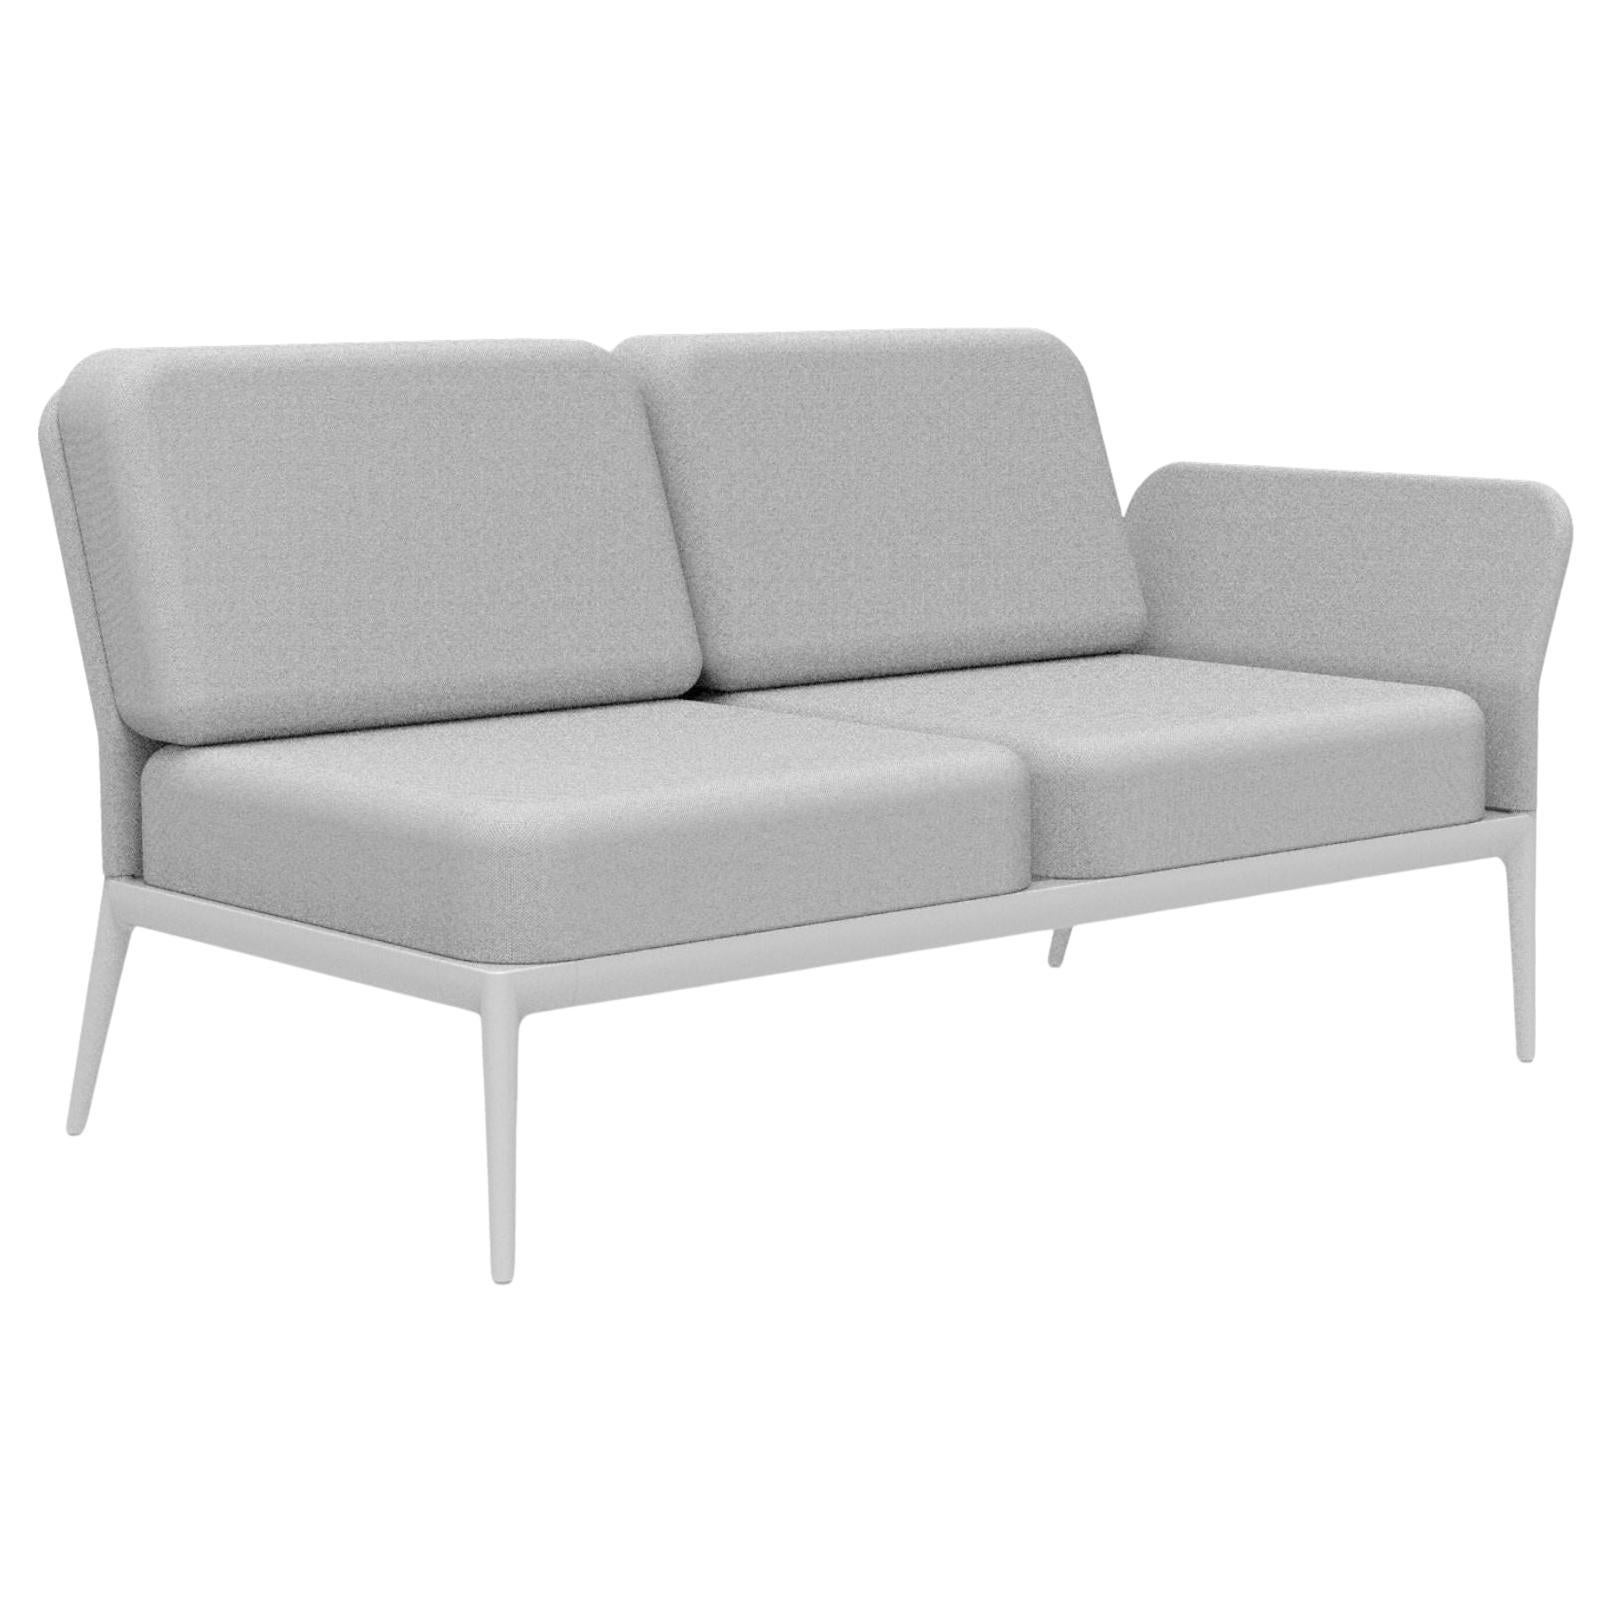 Cover White Double Left Modular Sofa by Mowee